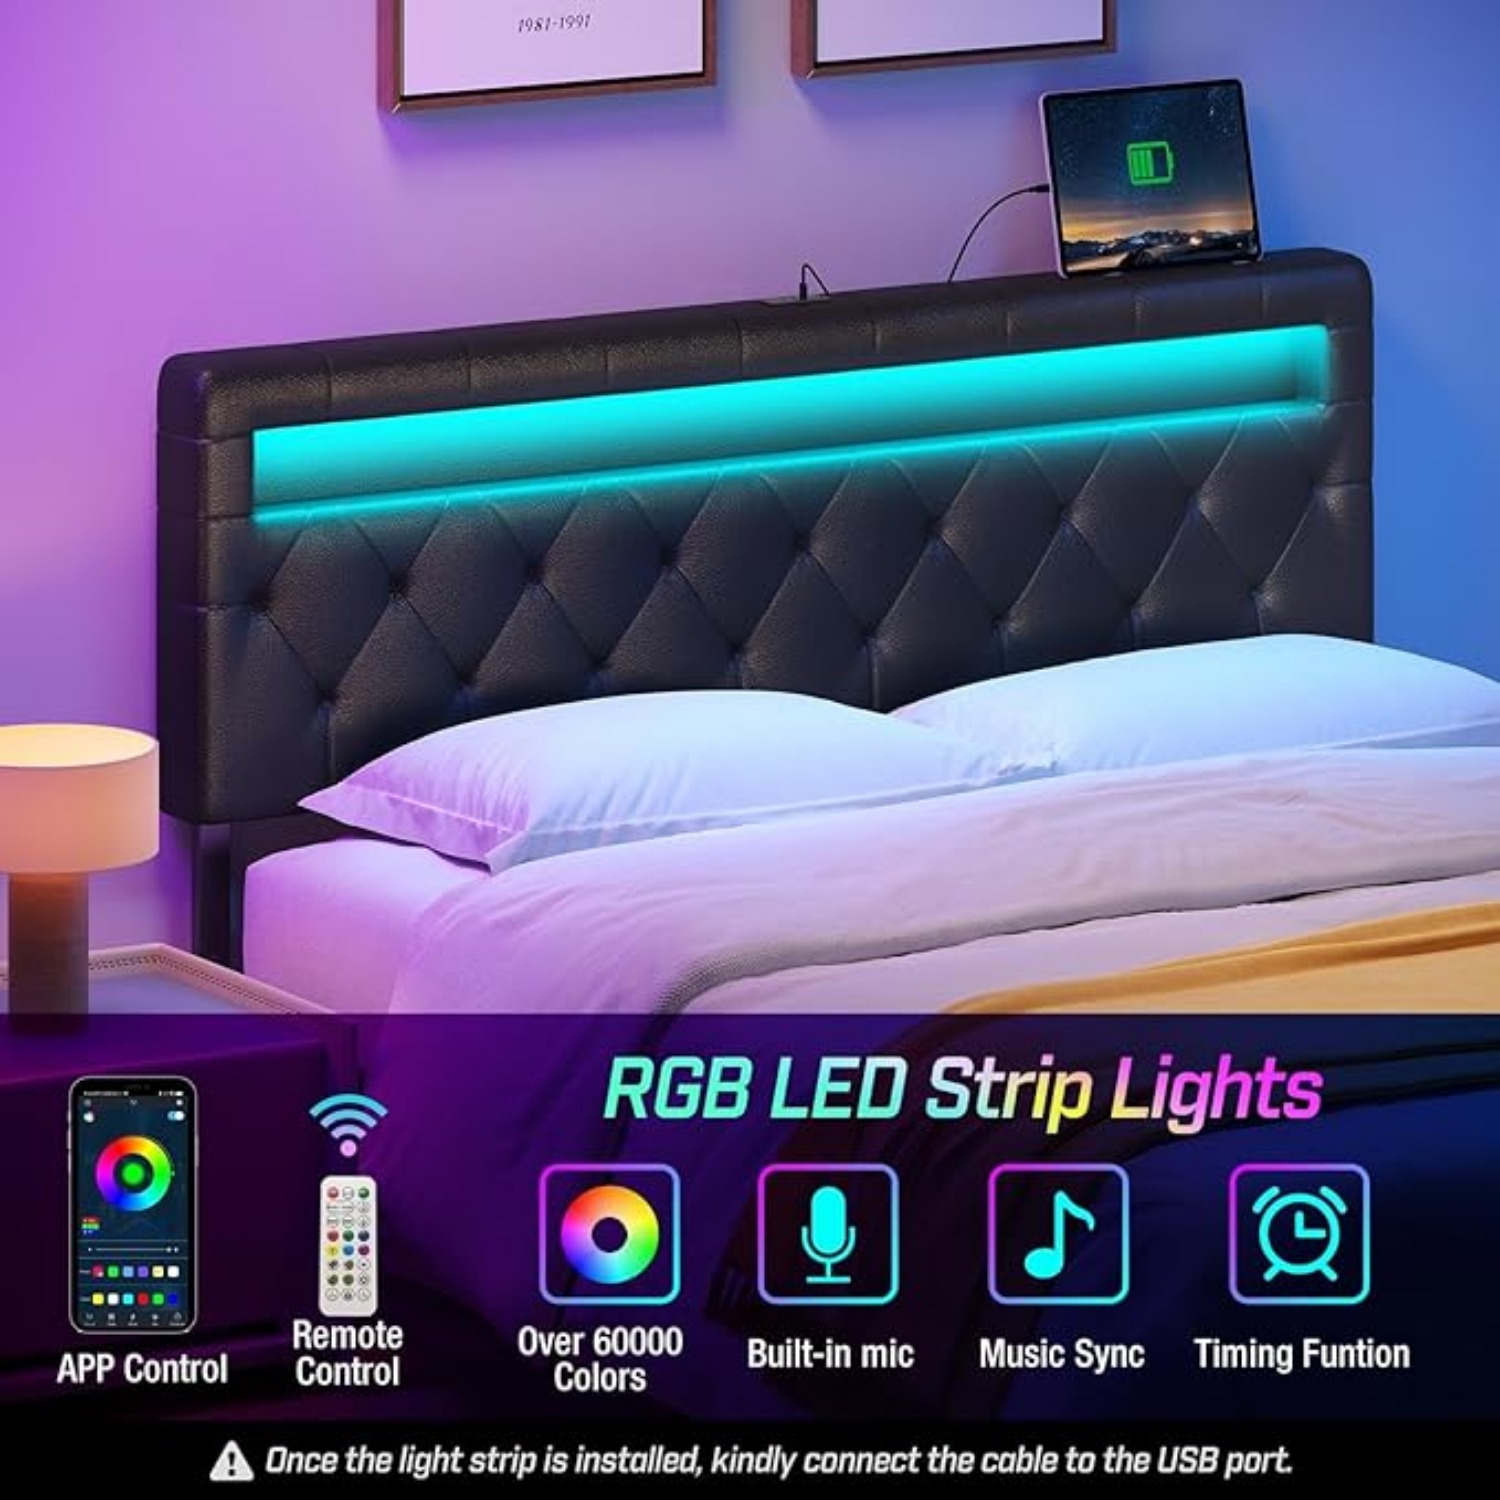 

Greenstell Headboard For Full Size Bed With 60, 000 Diy Color Of Led Light, Usb & Type C Post, Attach Frame, Height Adjustable, Black Wall Mounted Head Boards Only, Sturdy & Stable, Comfortable, Full